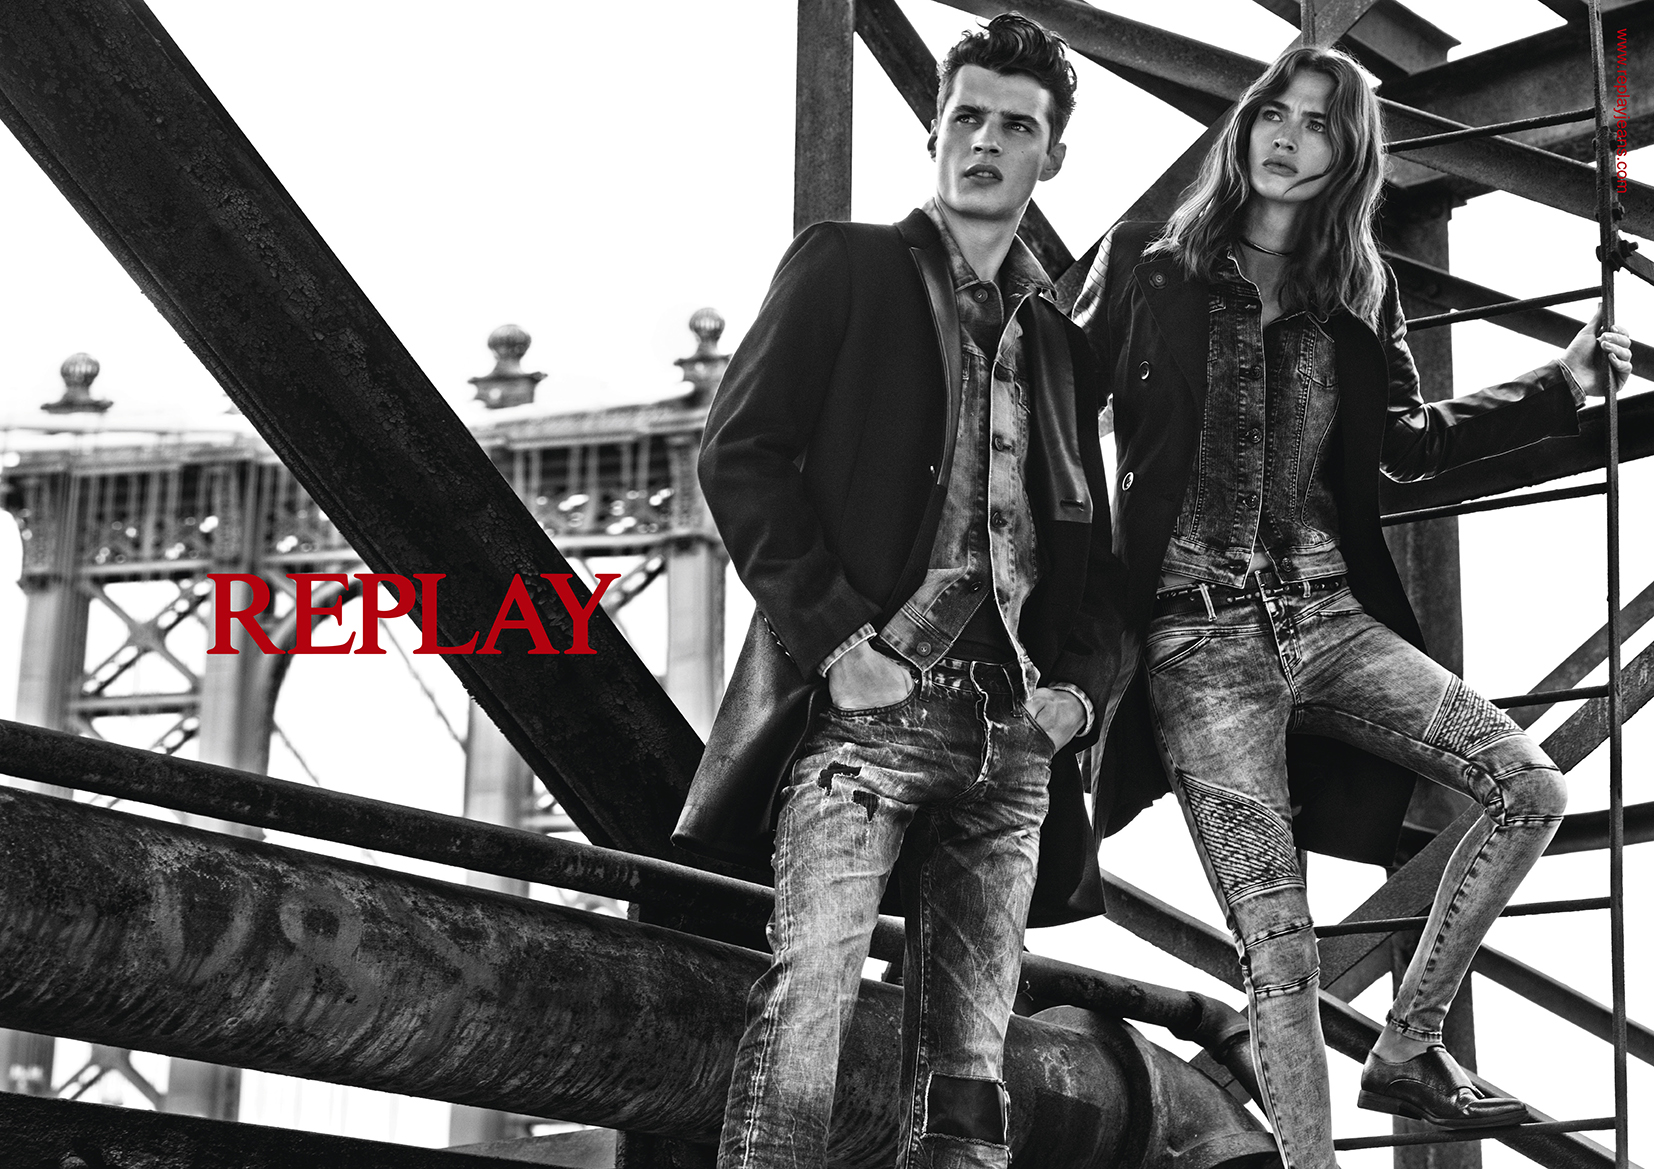 REPLAY FW15 CAMPAIGN